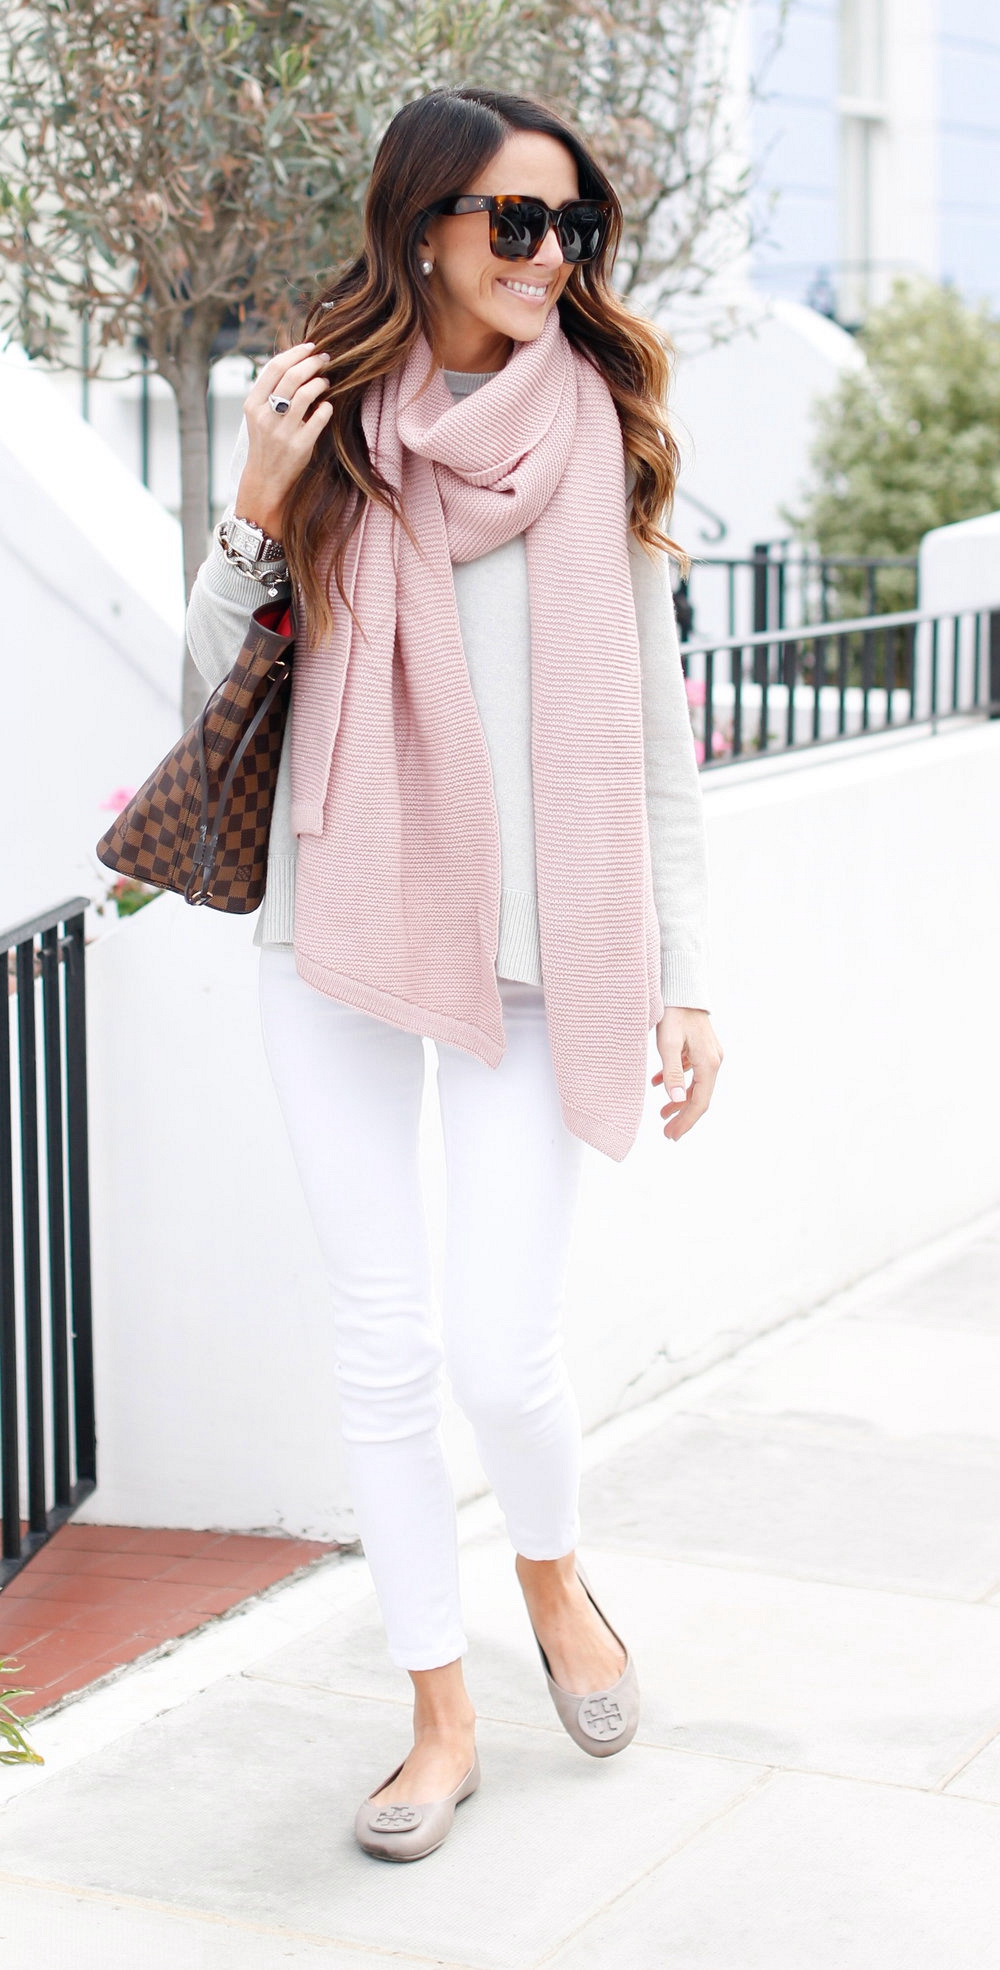  Trendy Outfit Ideas